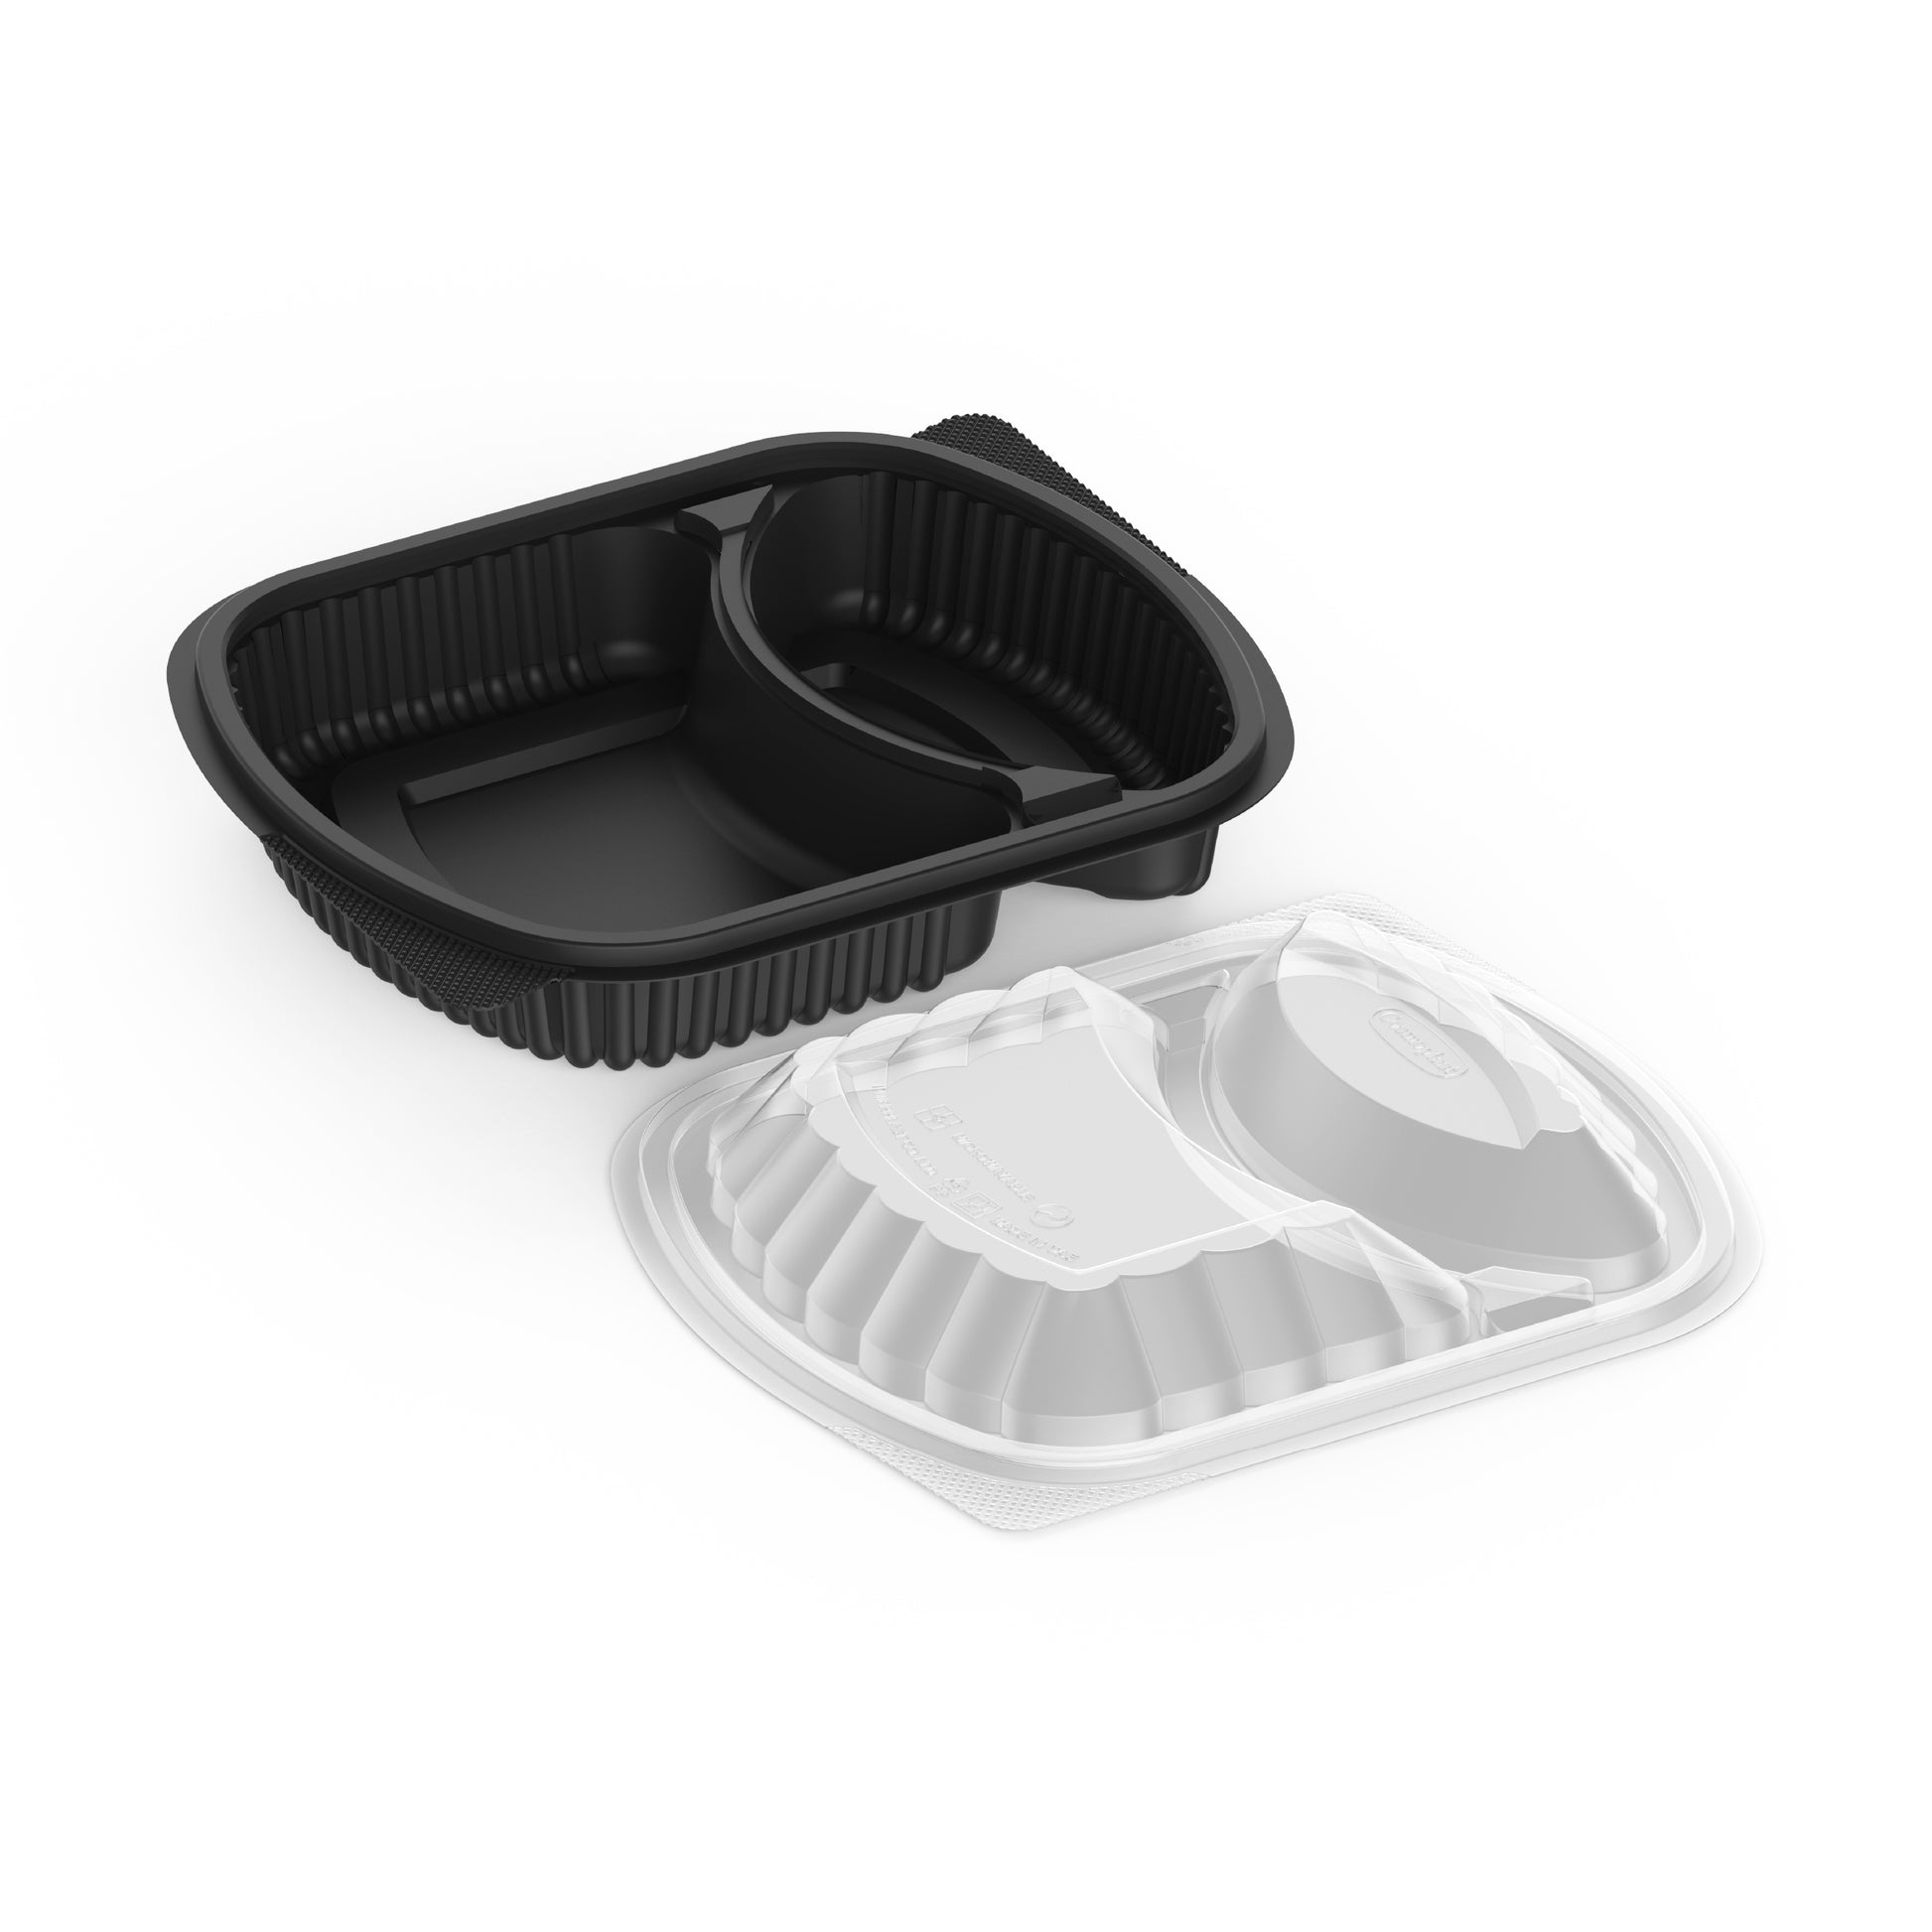 2 Compartments Pack of 10 Black Meal Containers with Clear Lids